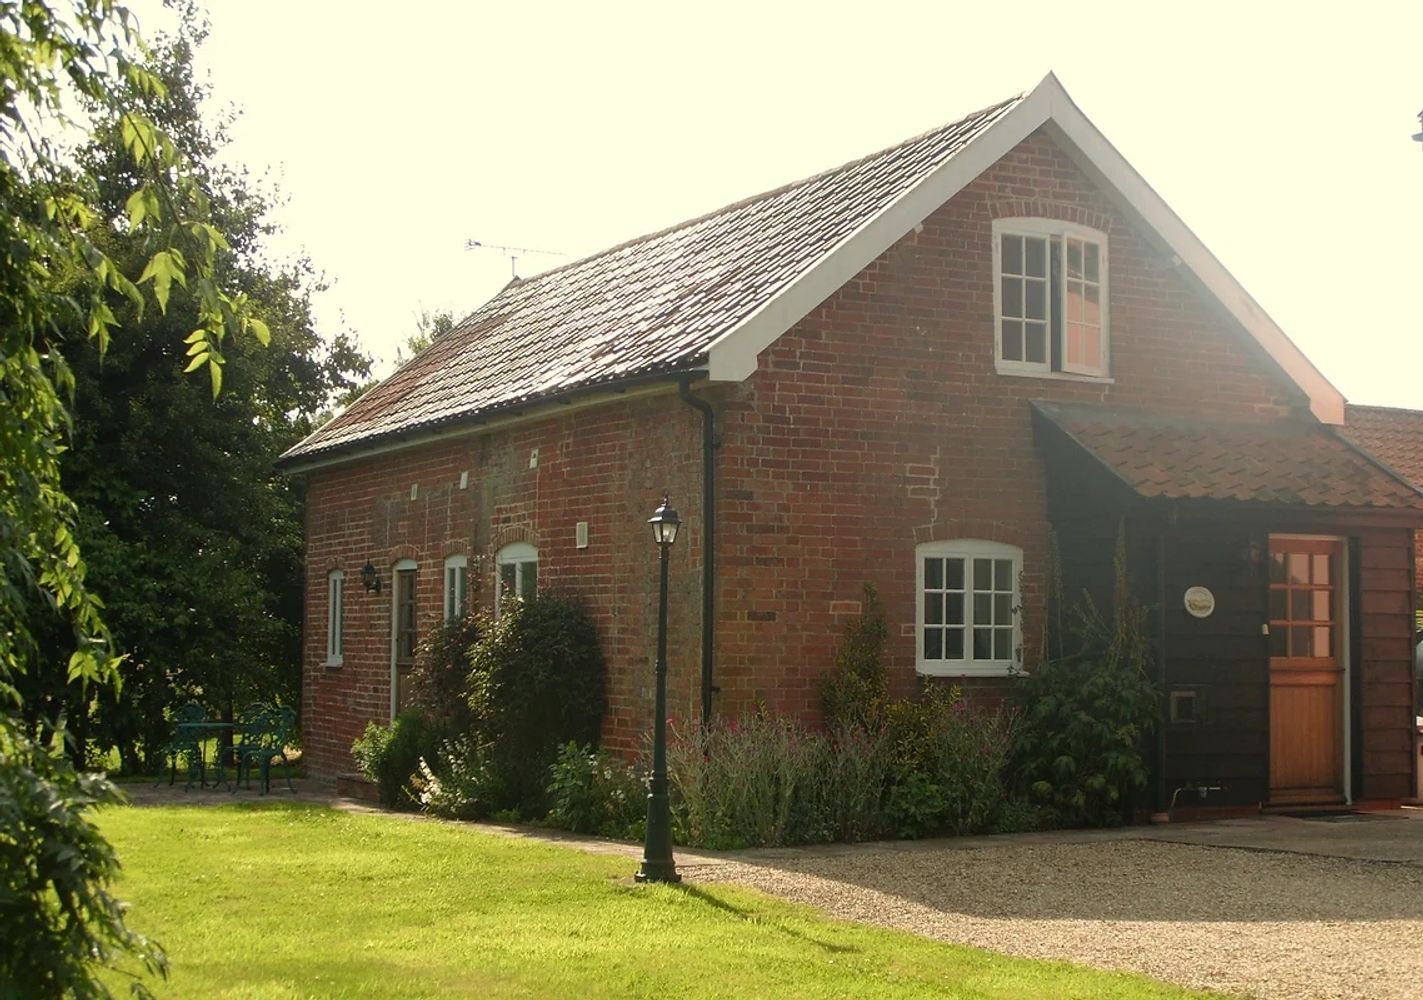 the cottage seen from the front